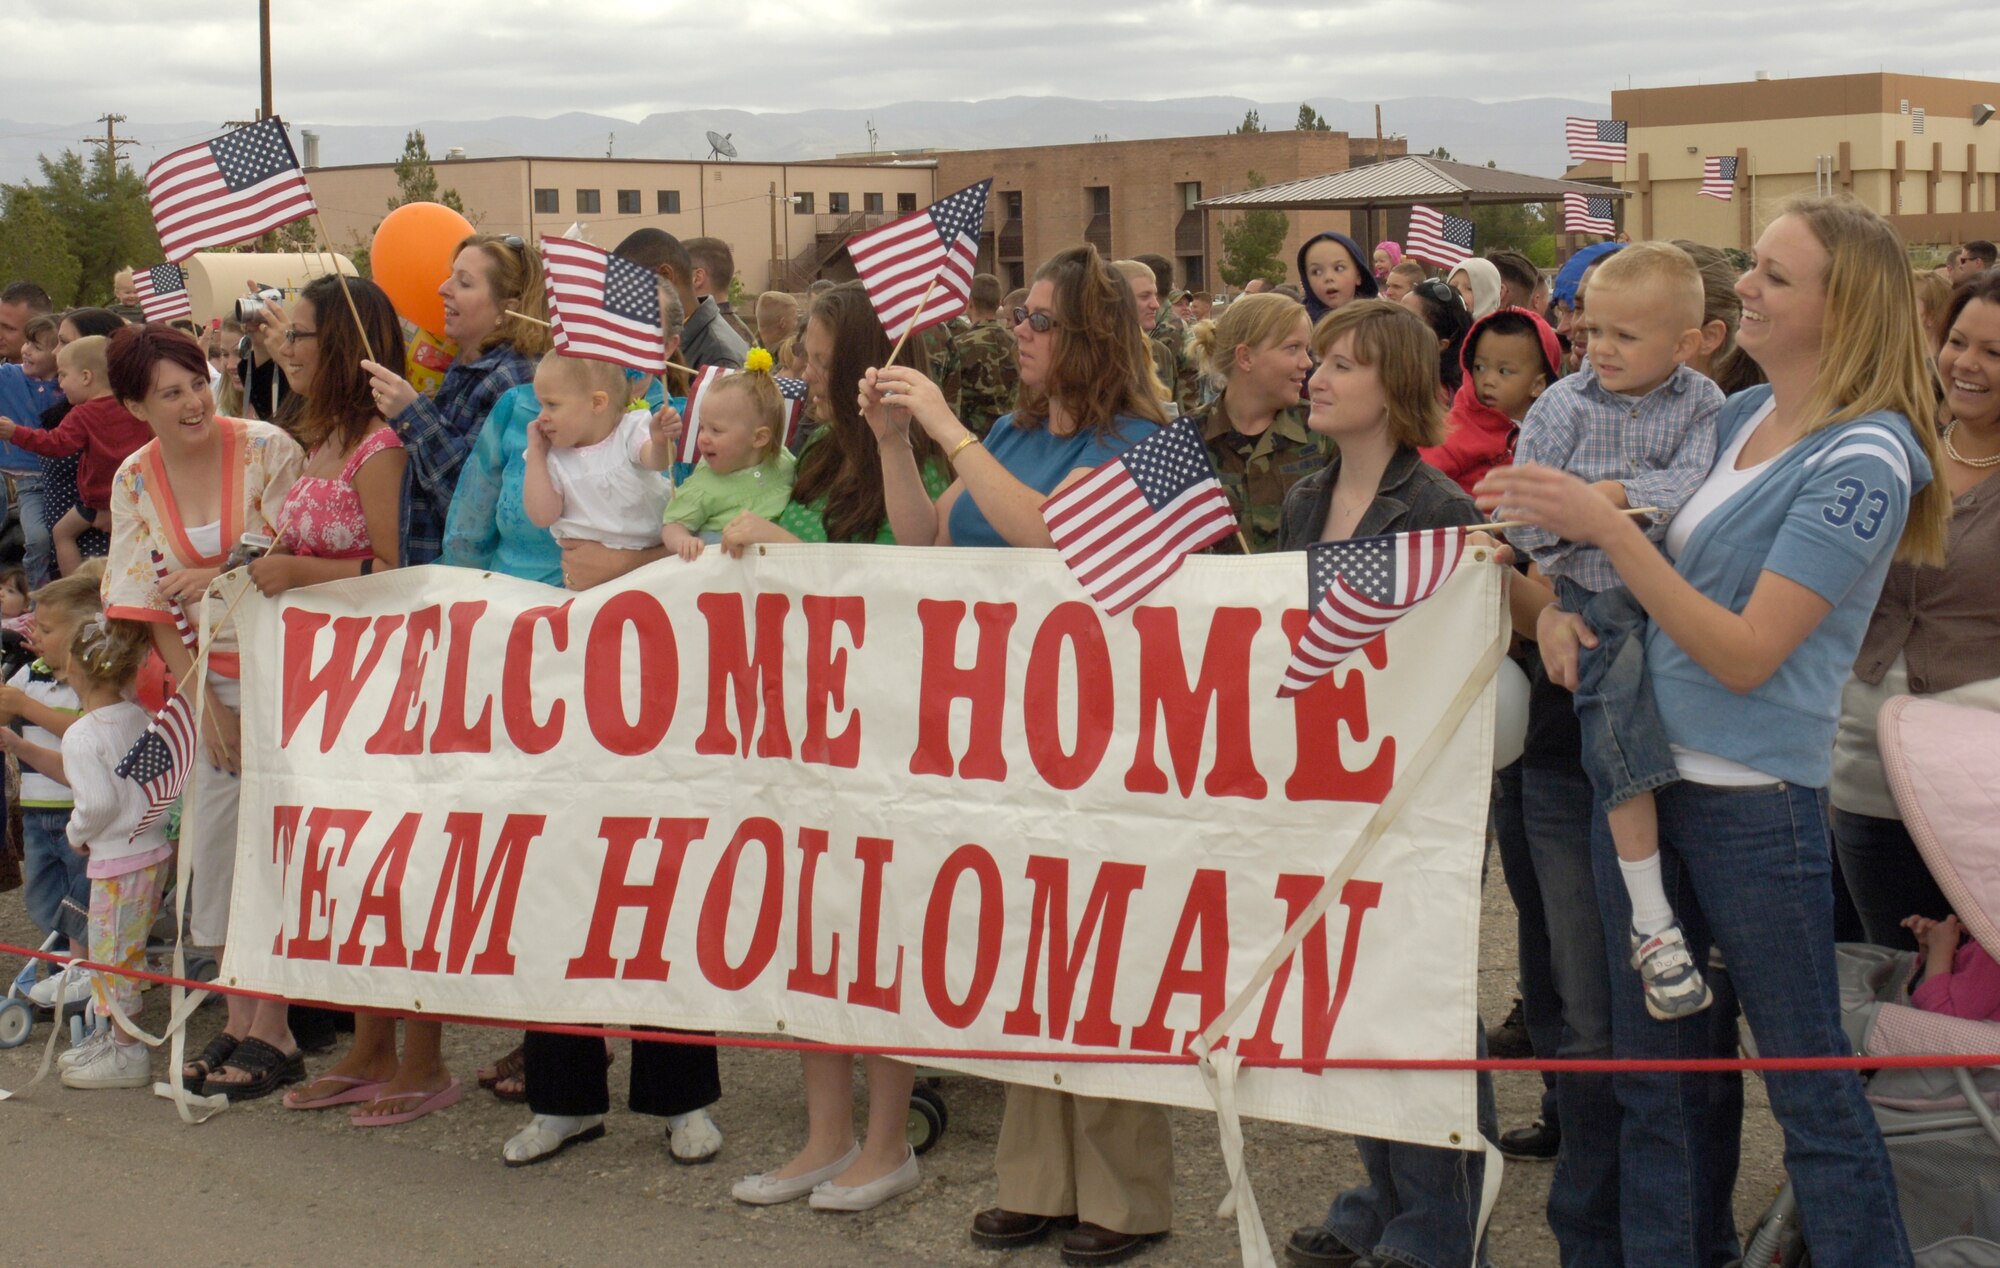 Family and friends wait at Holloman Air Force Base to greet loved ones who are returning home from a deployment at Kunsan Air Base, Republic of Korea April 13. (U.S. Air Force photo by Airman Michael Means)